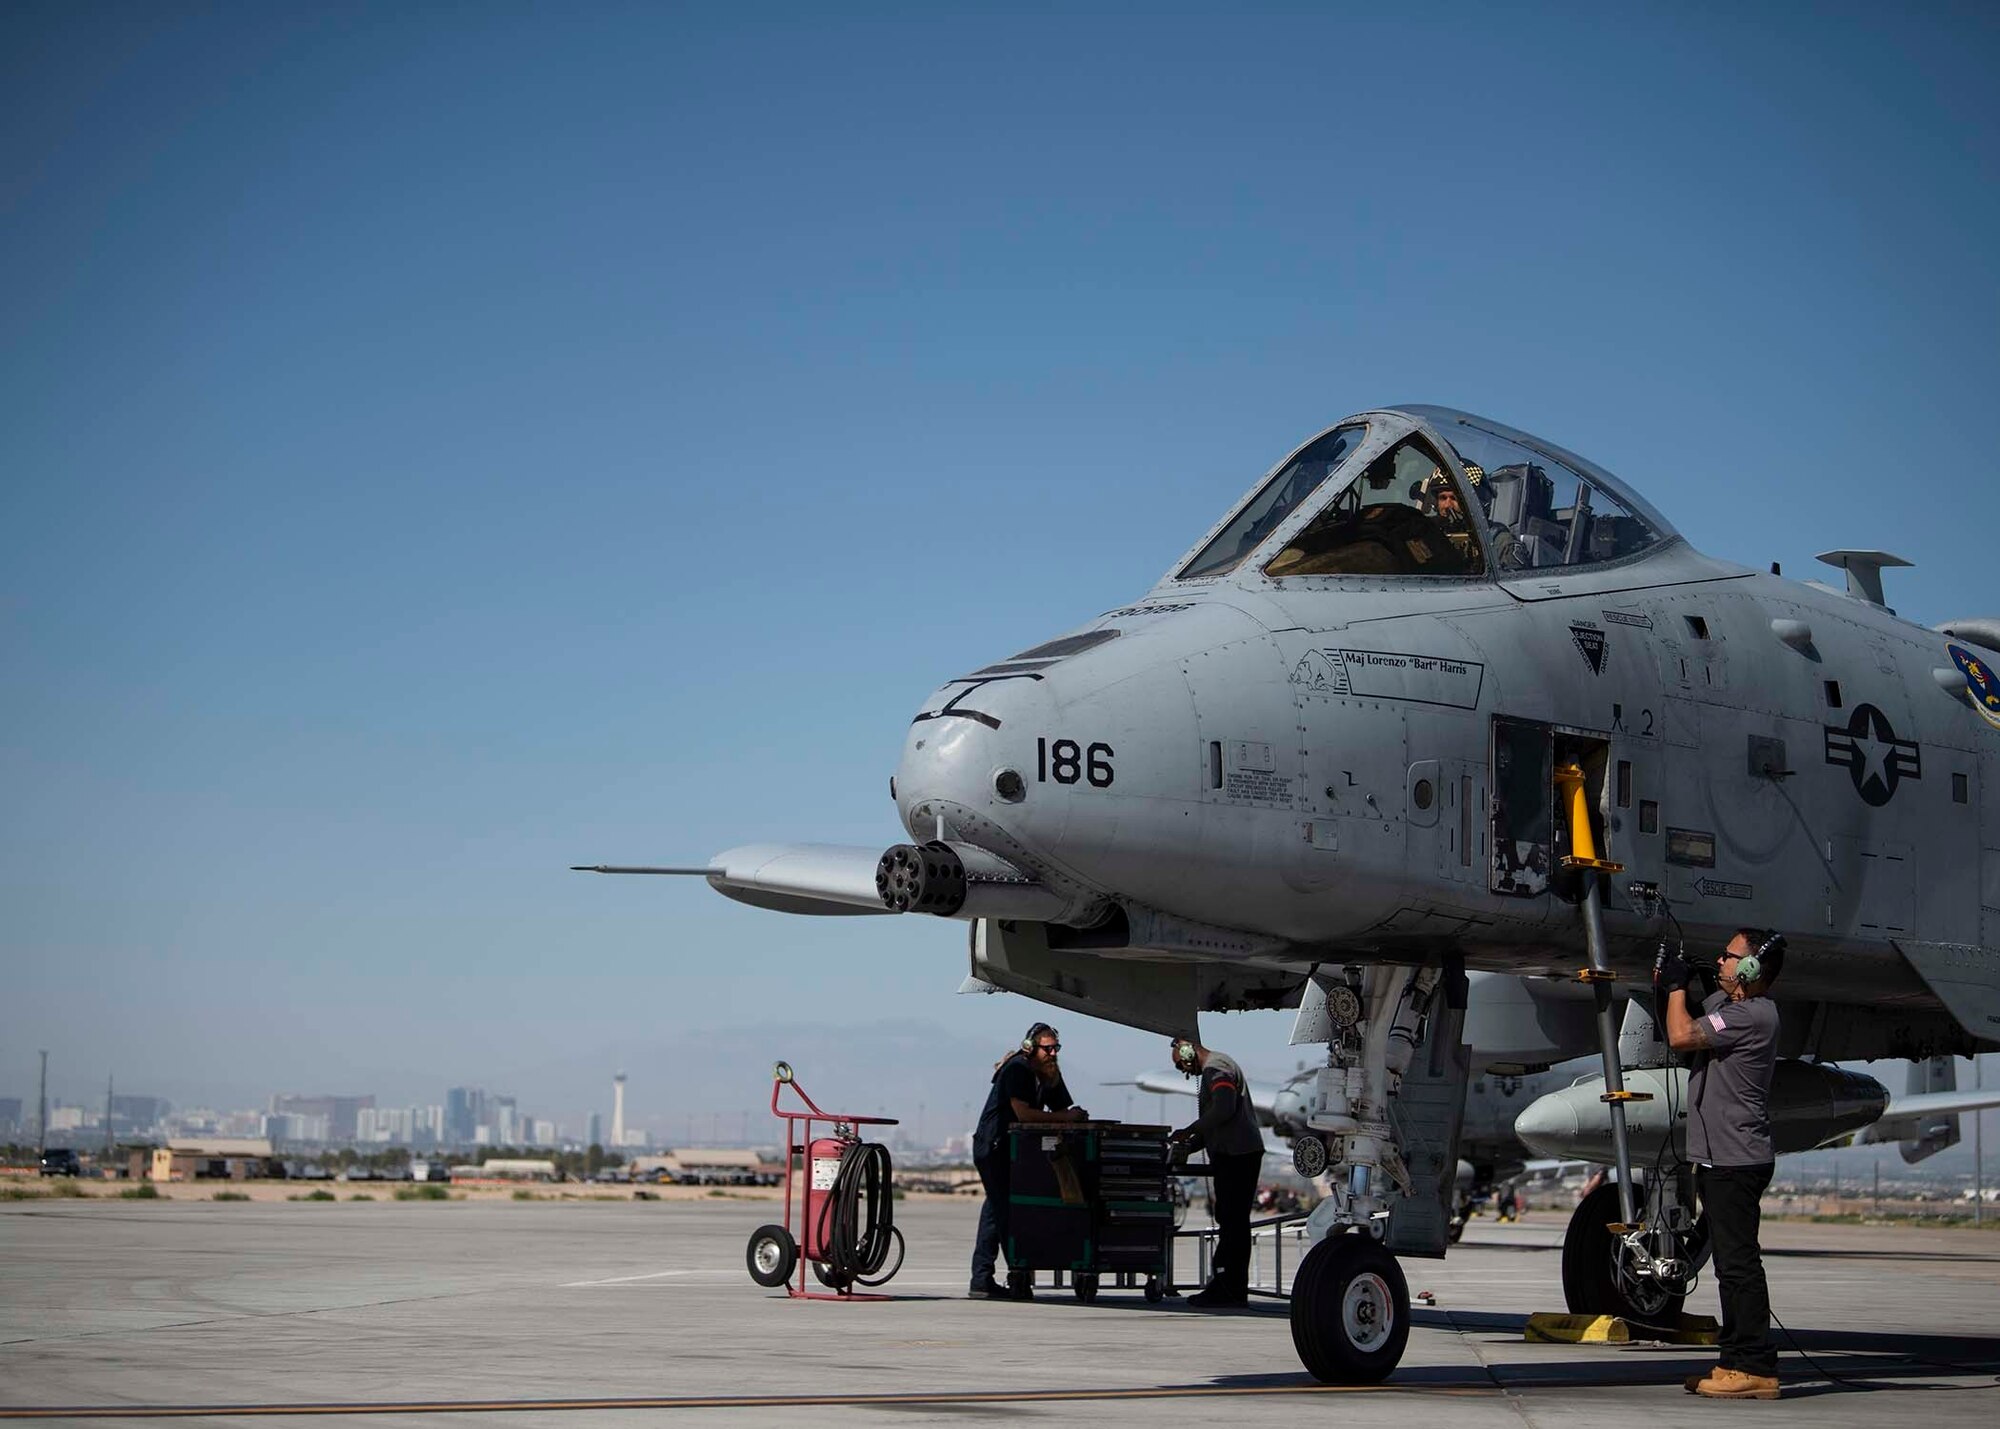 An A-10 Thunderbolt II assigned to the 86th Weapons Squadron prepares to launch with the help of its Maintenance First Support Service team at Nellis Air Force Base, Nev., June 21, 2019. Pilots assigned to the 6th Combat Training Squadron and 66th Weapons Squadron performed a flyover at 2nd Lt. James Lord’s funeral who was a World War II P-47 Thunderbolt pilot who returned home after remaining in POW/MIA status for more than 70 years. (U.S. Air Force photo by Airman 1st Class Bryan Guthrie)